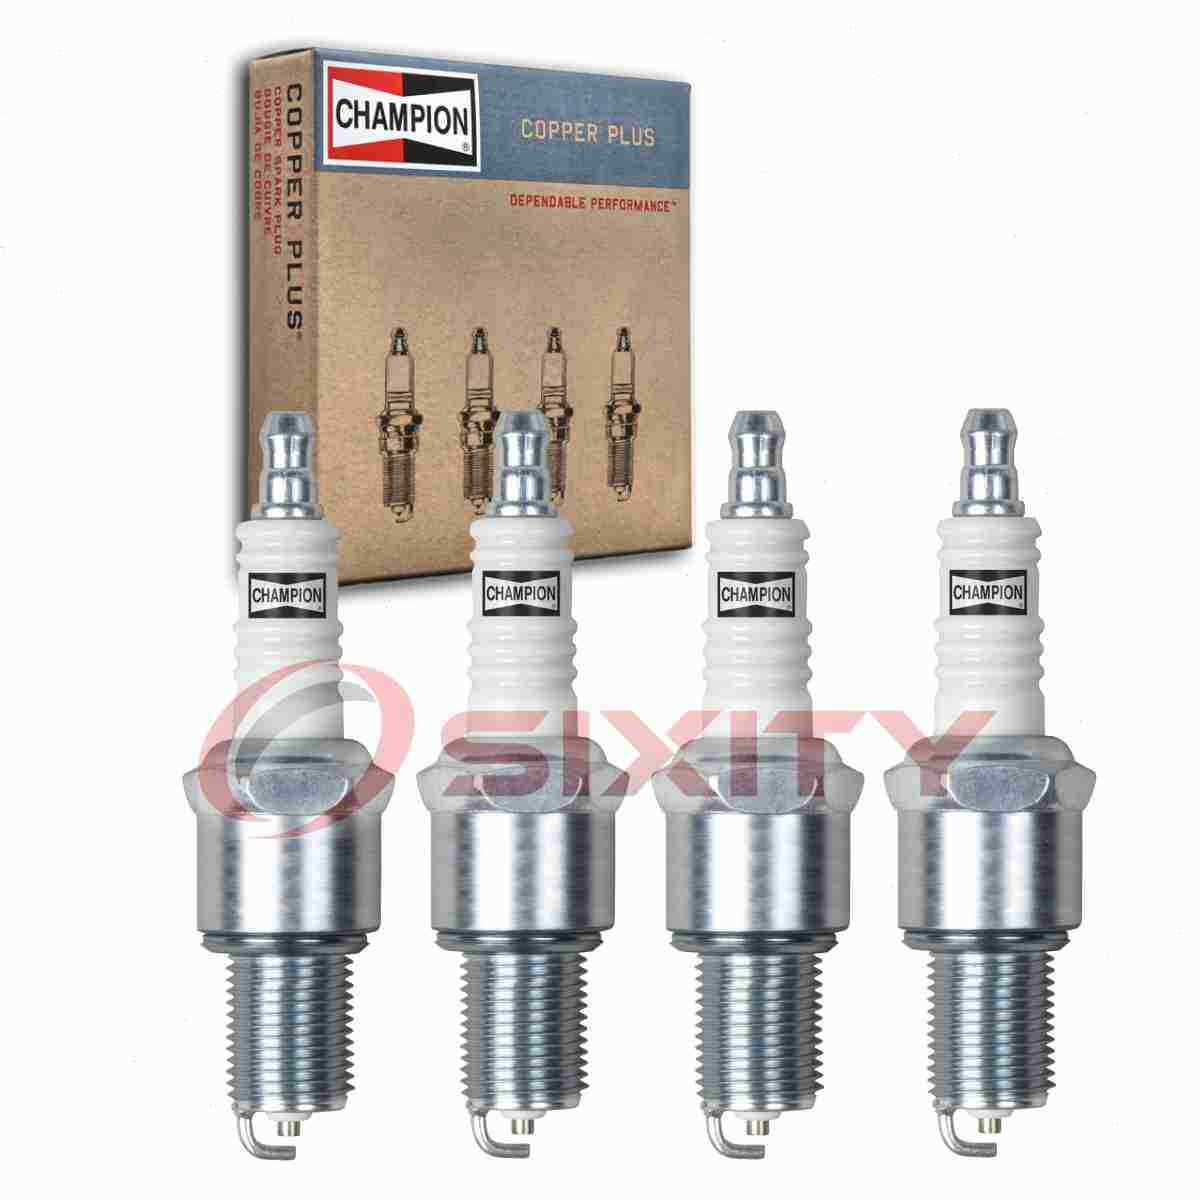 4 pc Champion Exhaust Side Copper Plus Spark Plugs for 1982-1983 Nissan pq